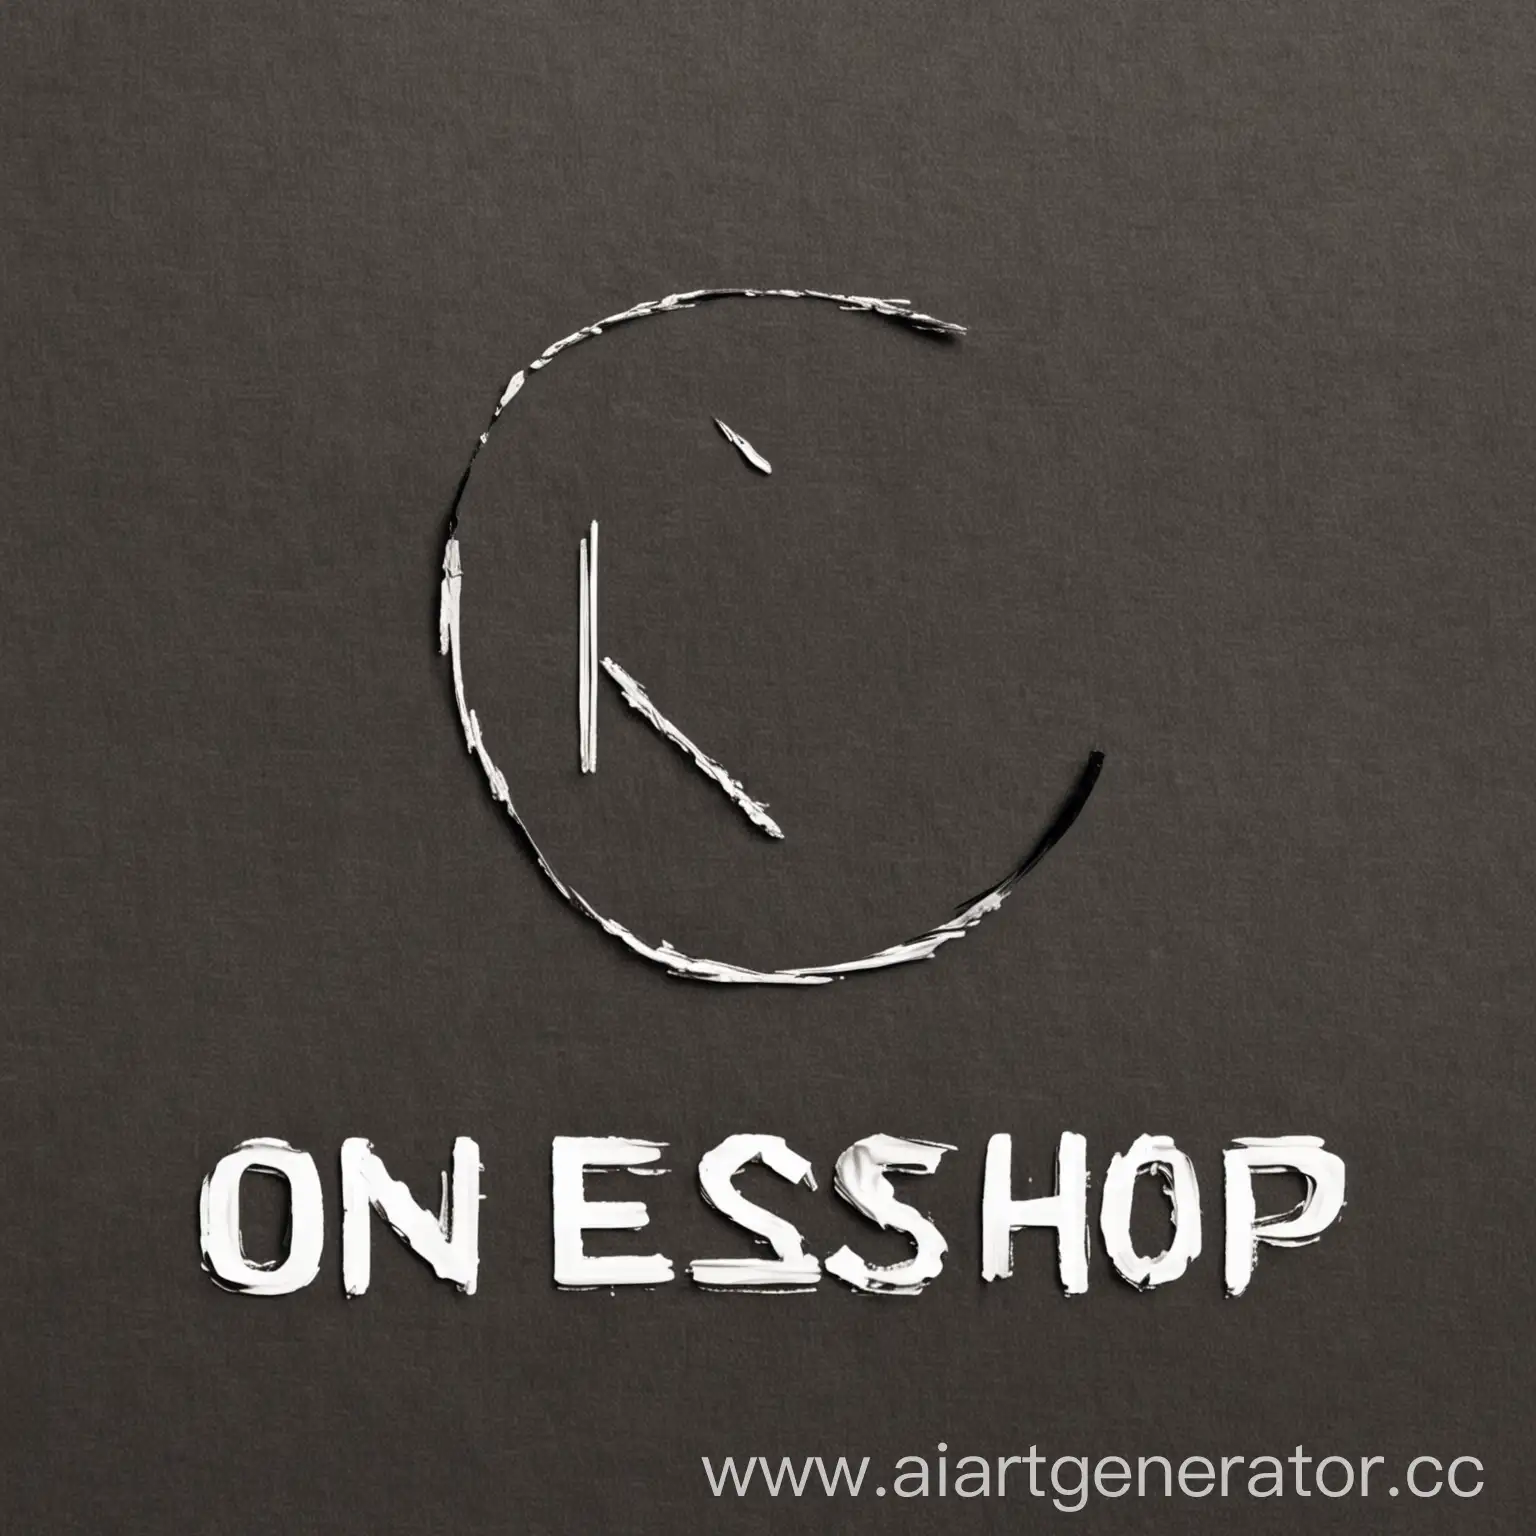 Online-Shopping-Concept-with-Word-Onekshop